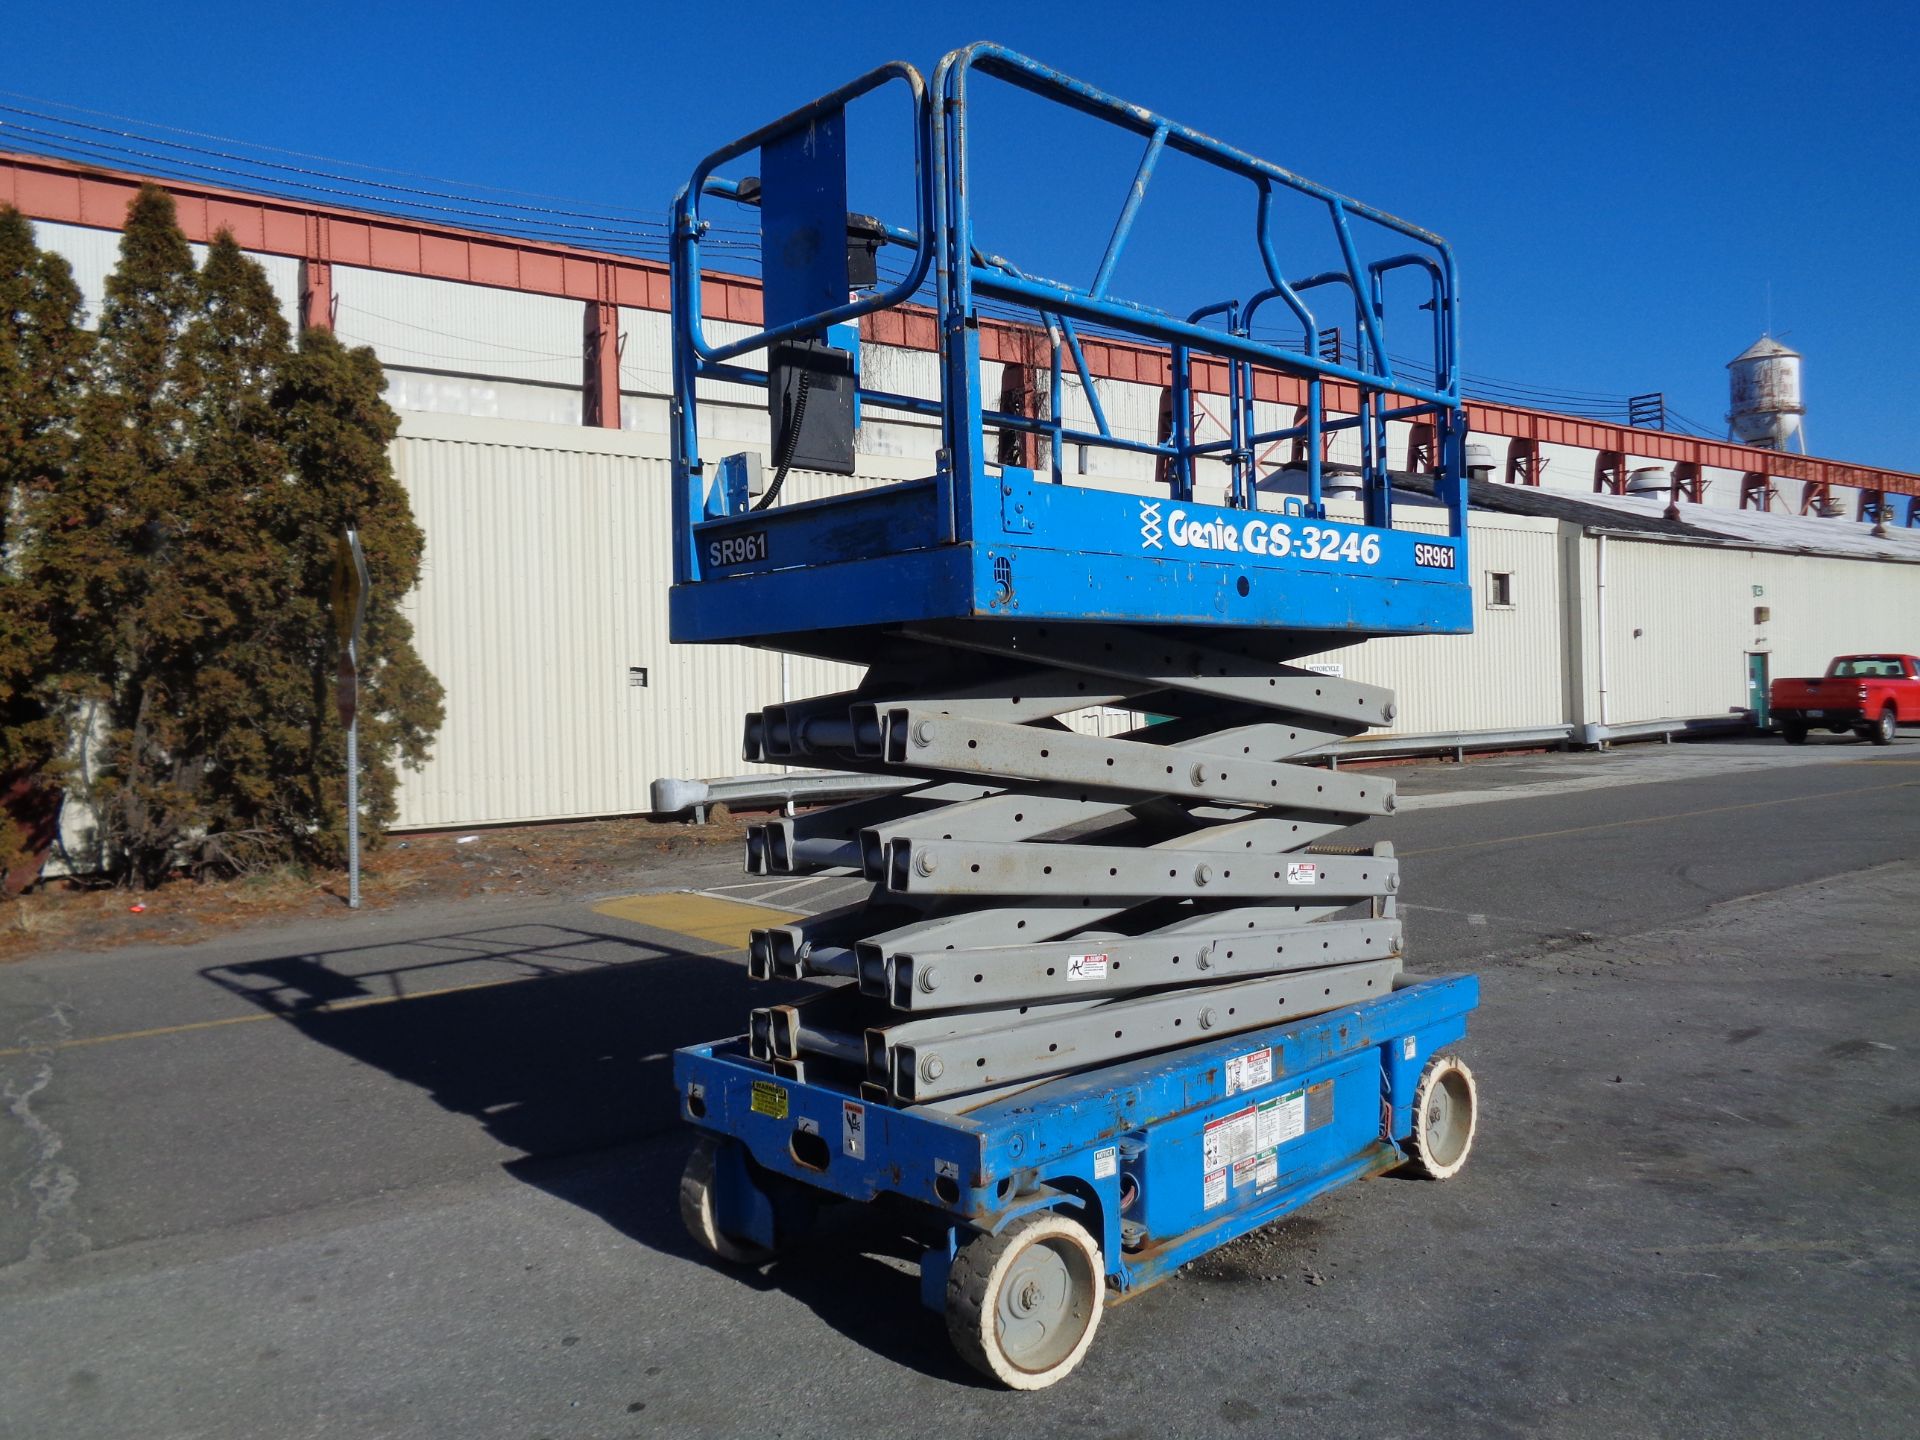 Genie GS3246 Electric Scissor Lift - 32ft Height - Image 5 of 13